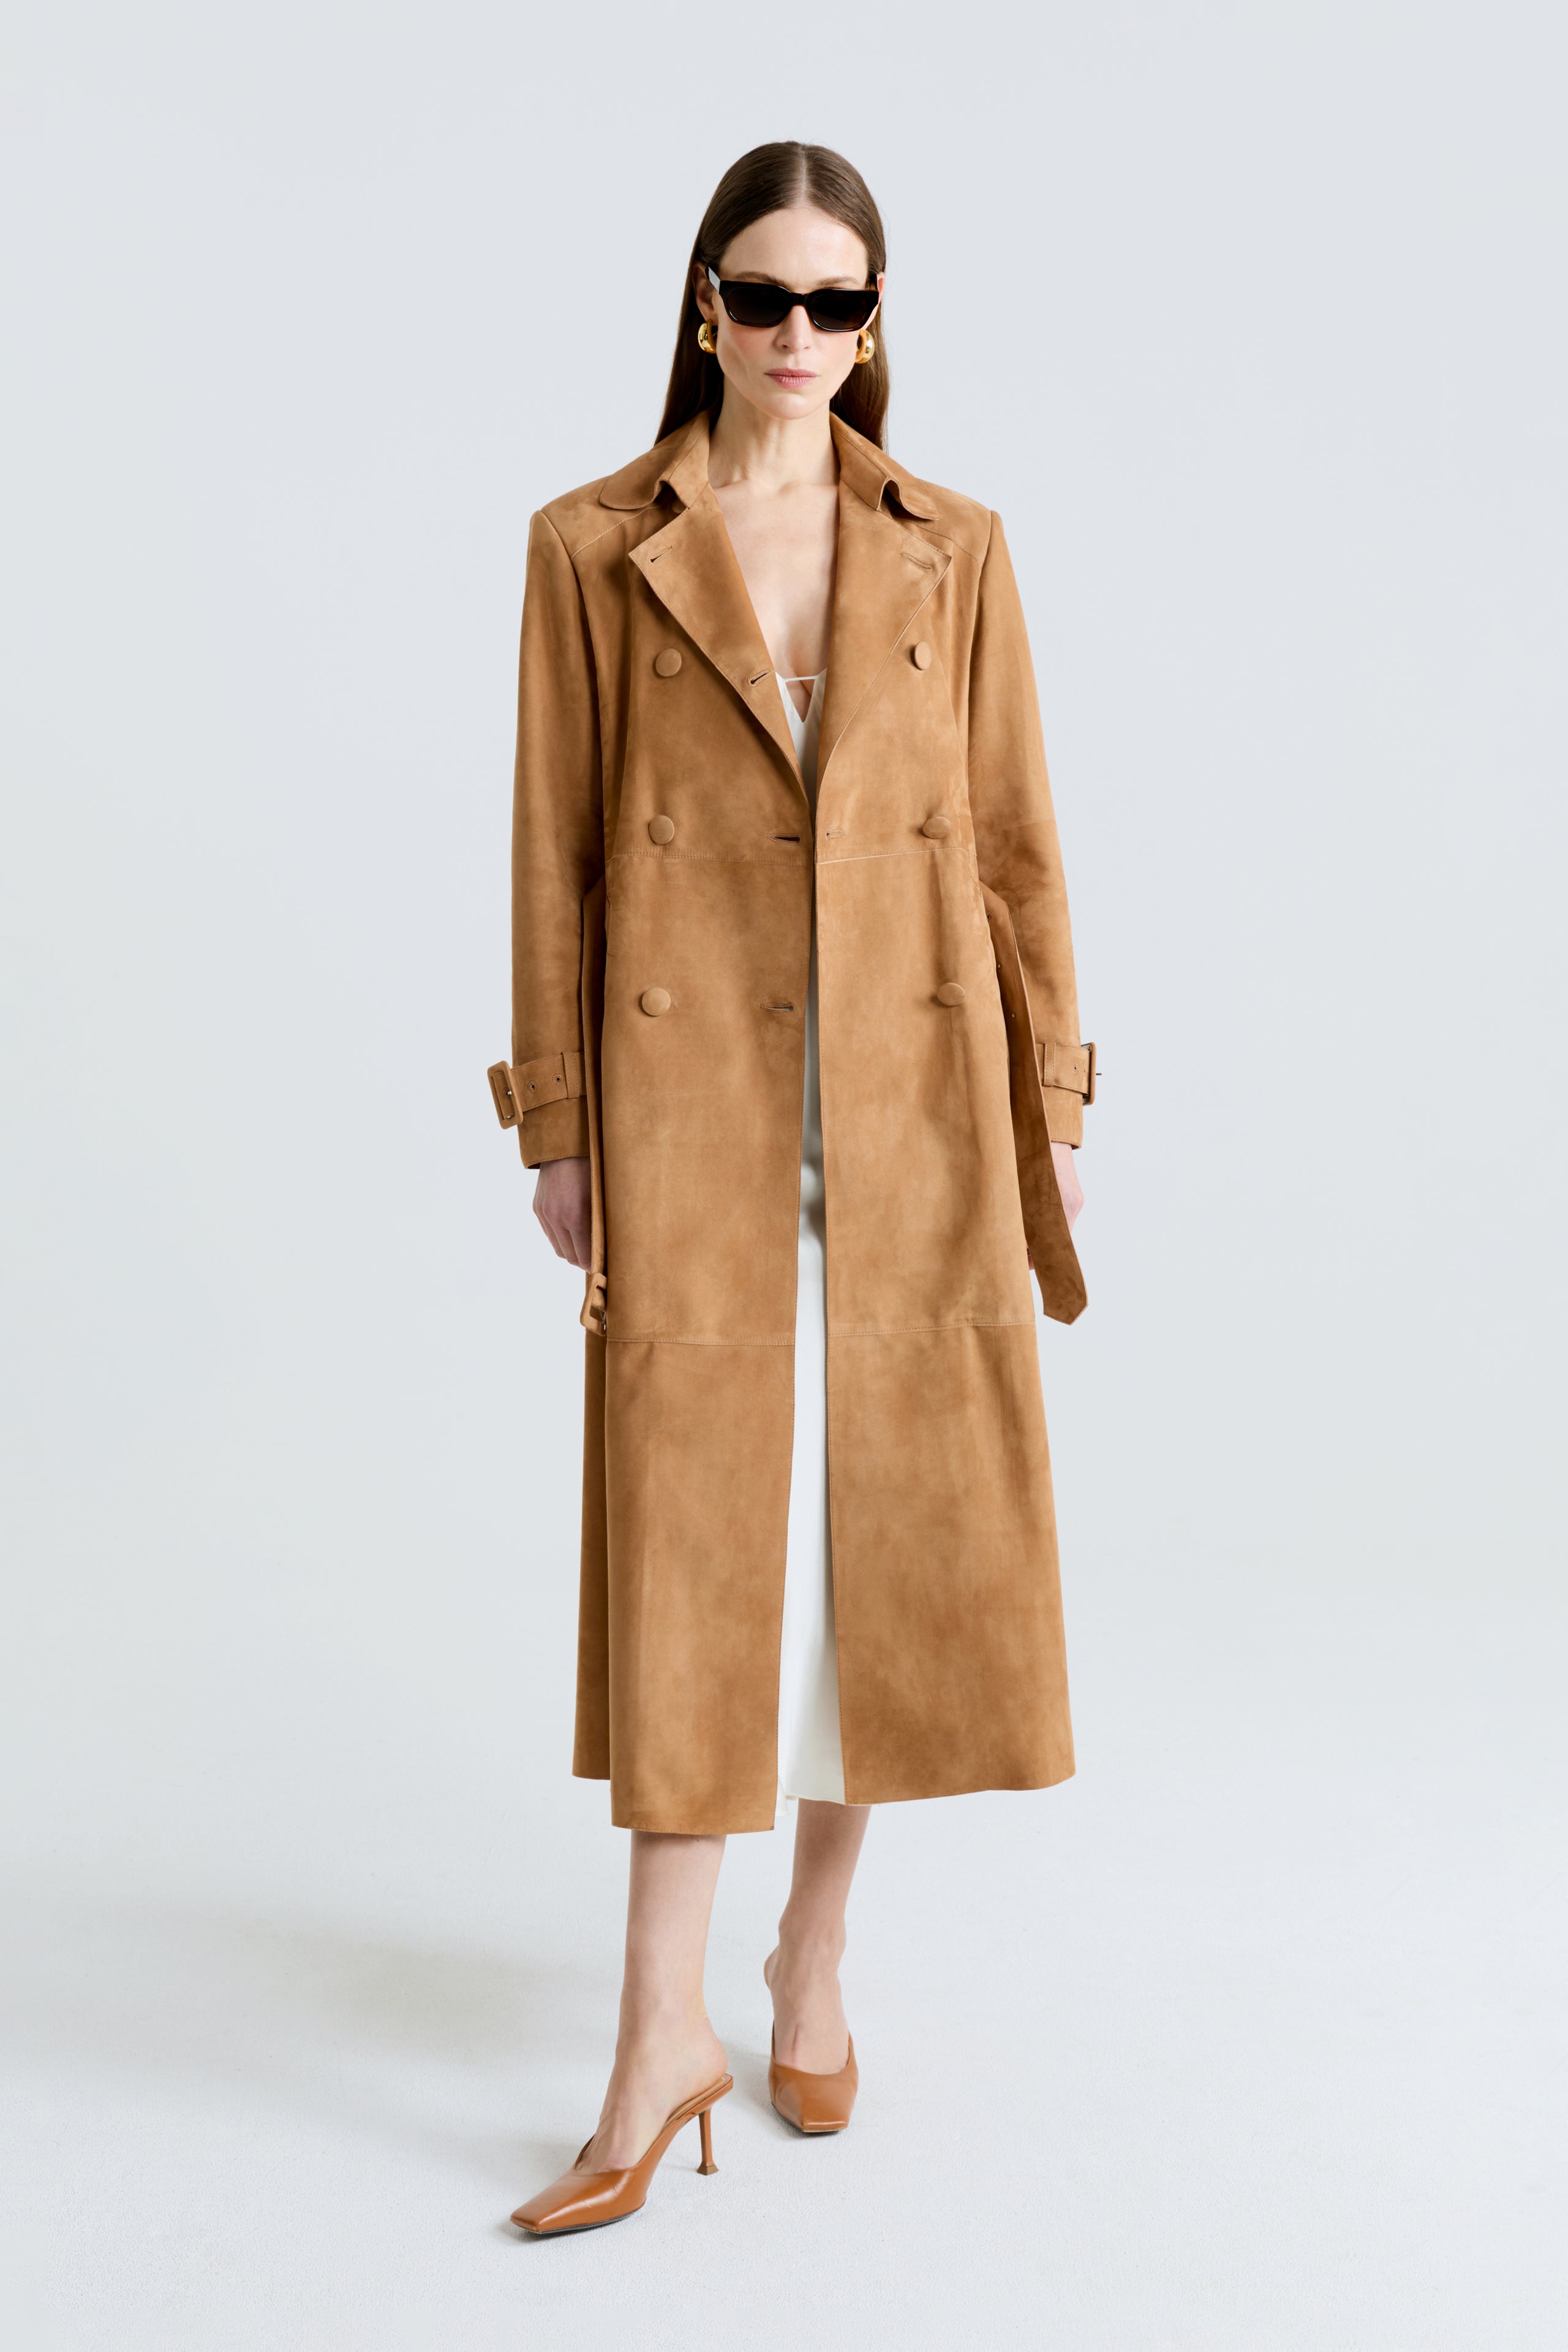 Model is wearing the Tate Beige Everyday Suede Trench Coat Front